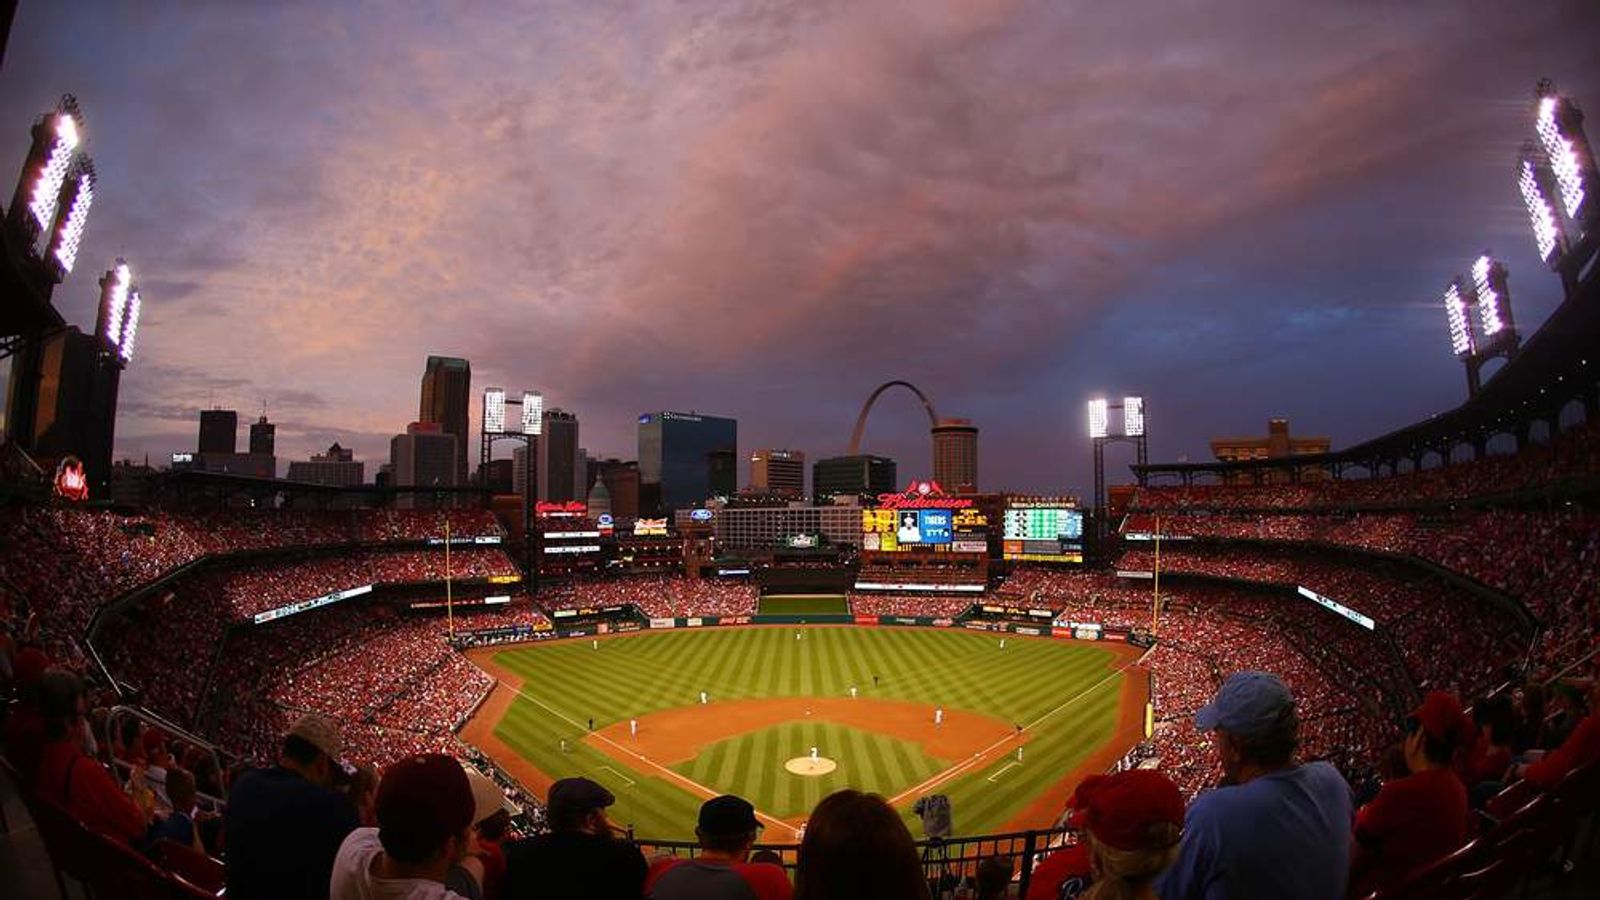 Cardinals Investigated for Hacking Into Astros' Database - The New